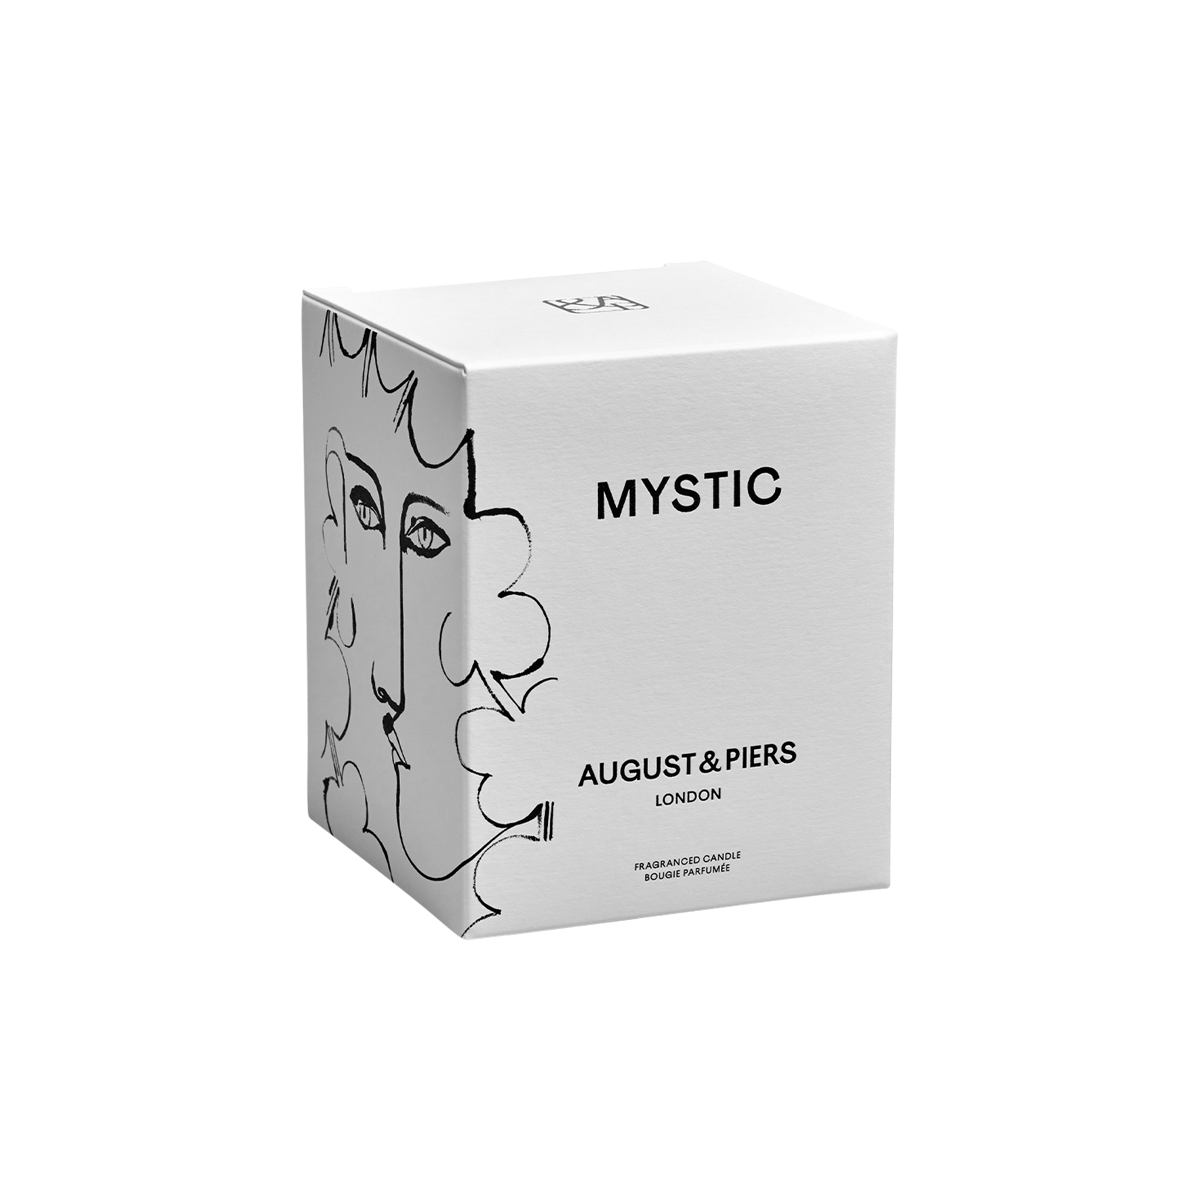 AUGUST&PIERS - Mystic Scented Candle